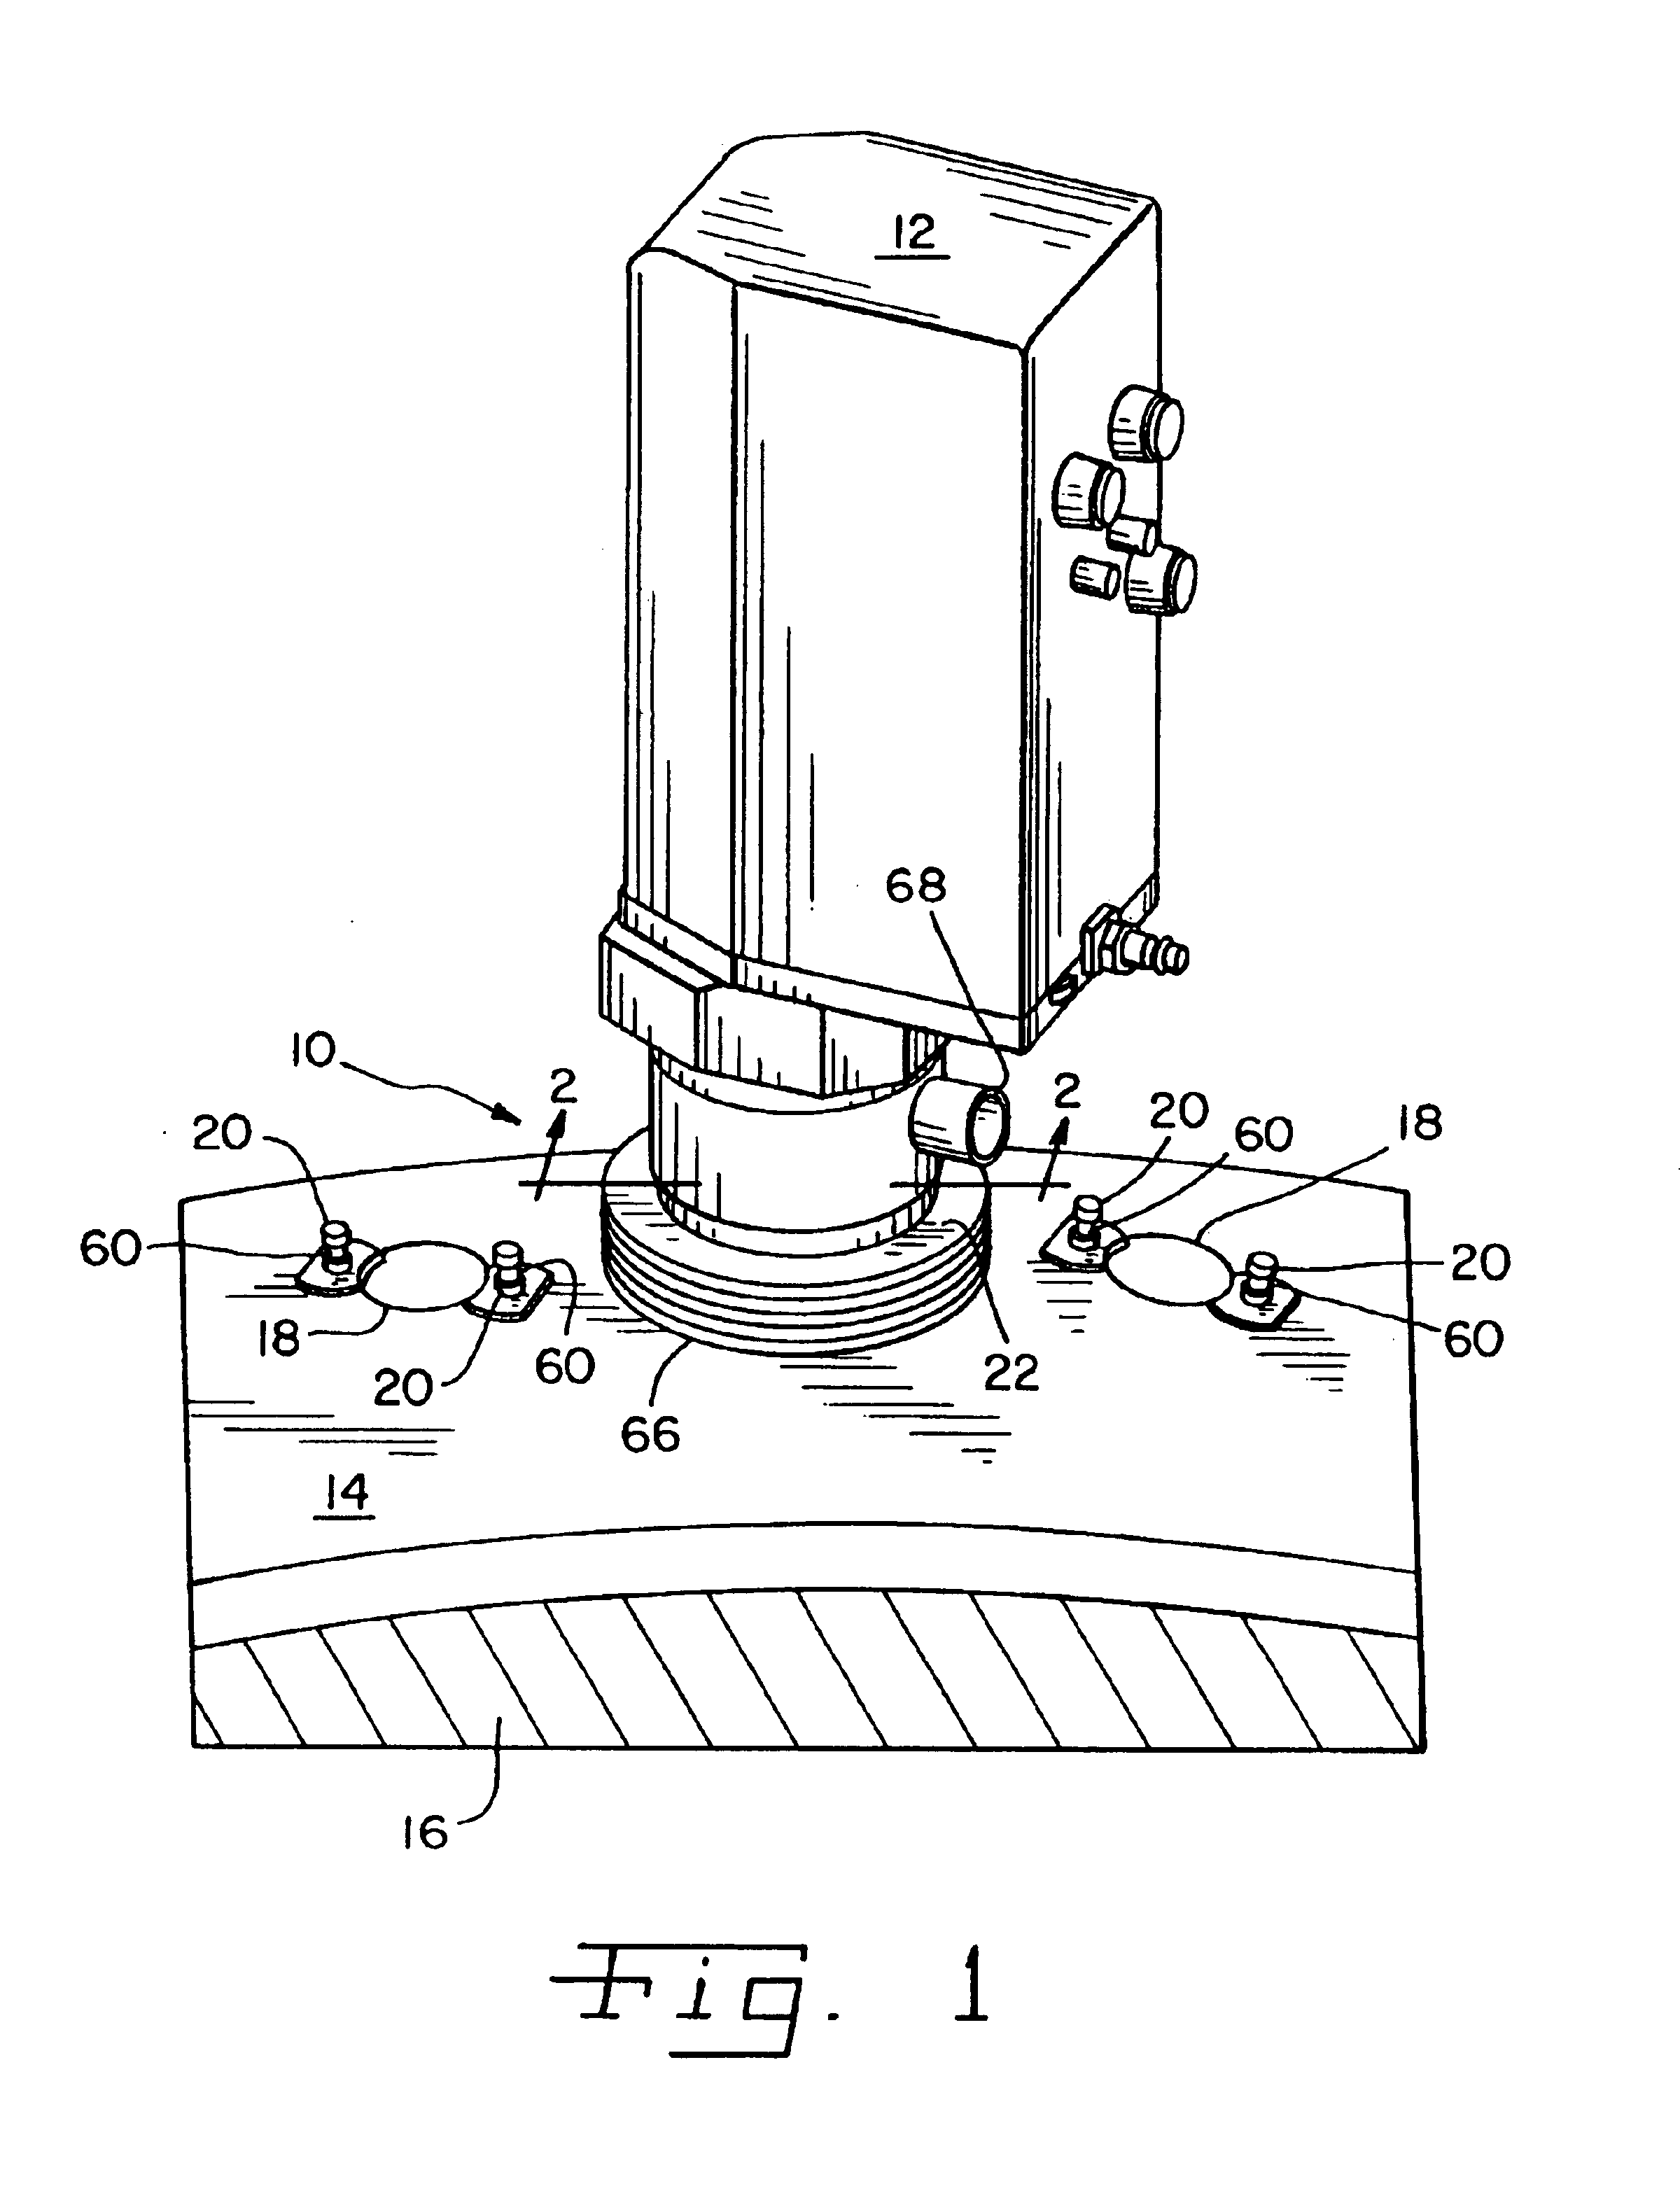 Fixation device for a portable orbital drilling unit